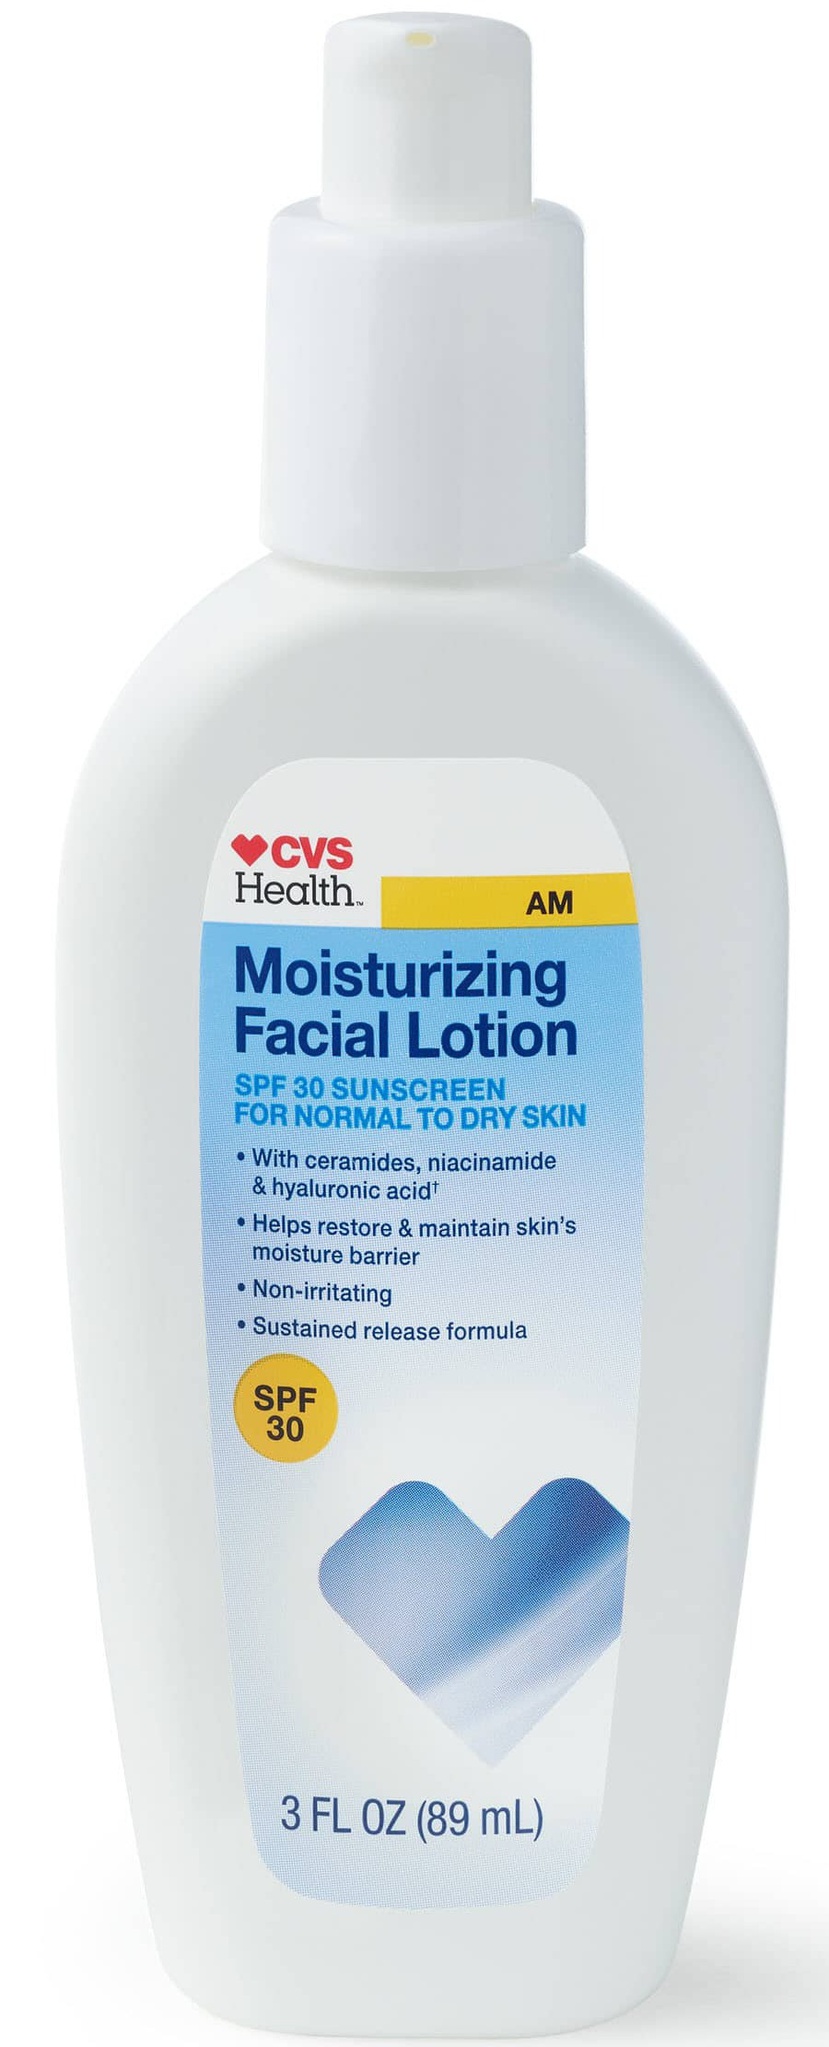 CVS Health Moisturizing Facial Lotion SPF 30 For Normal To Dry Skin